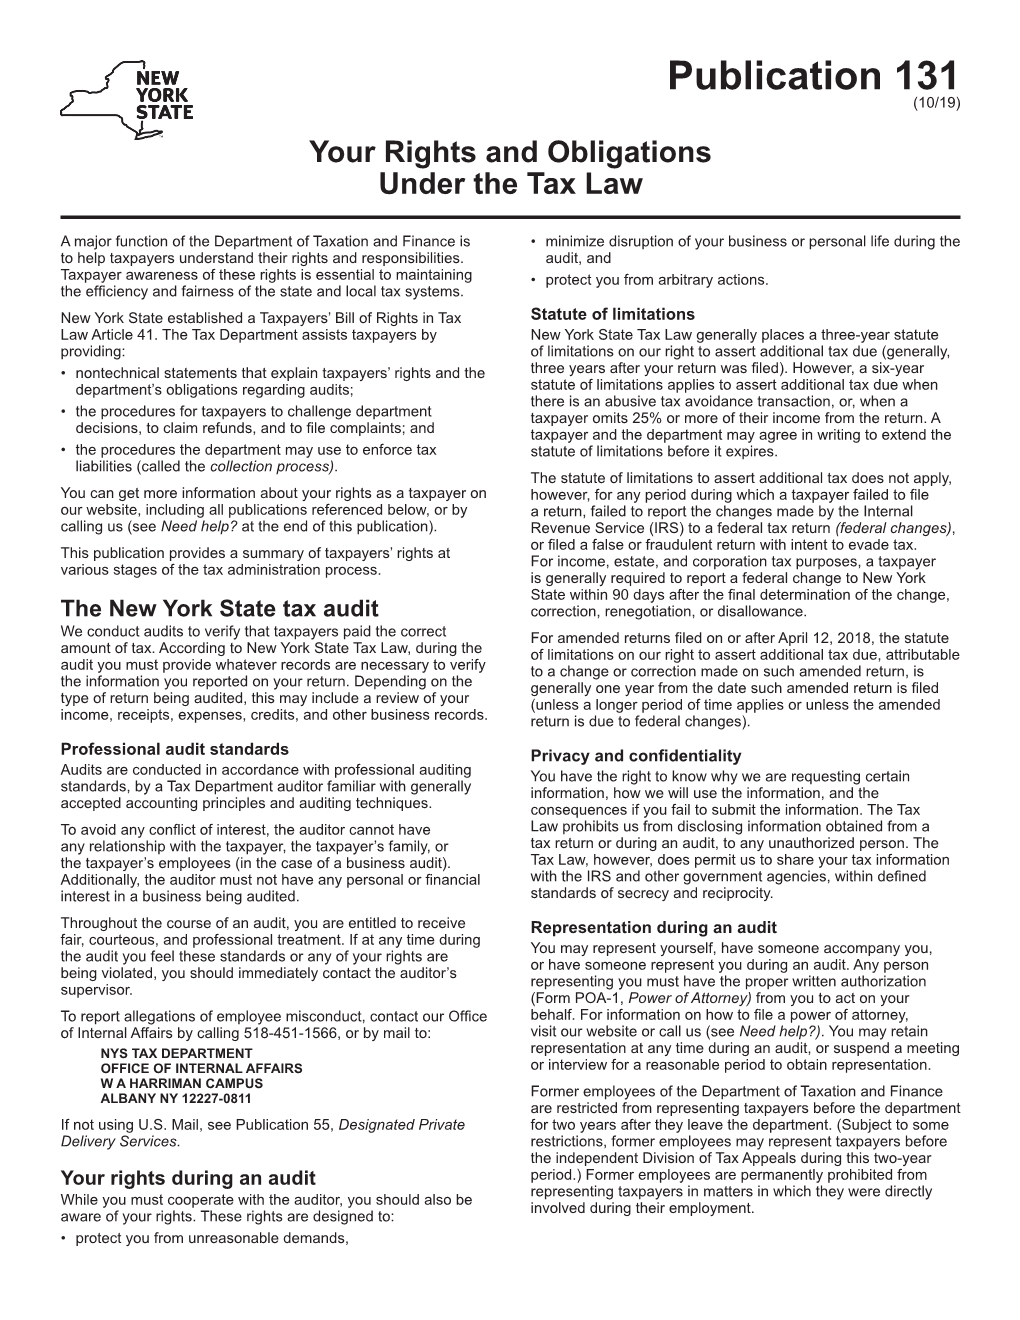 Publication 131, Your Rights and Obligations Under the Tax